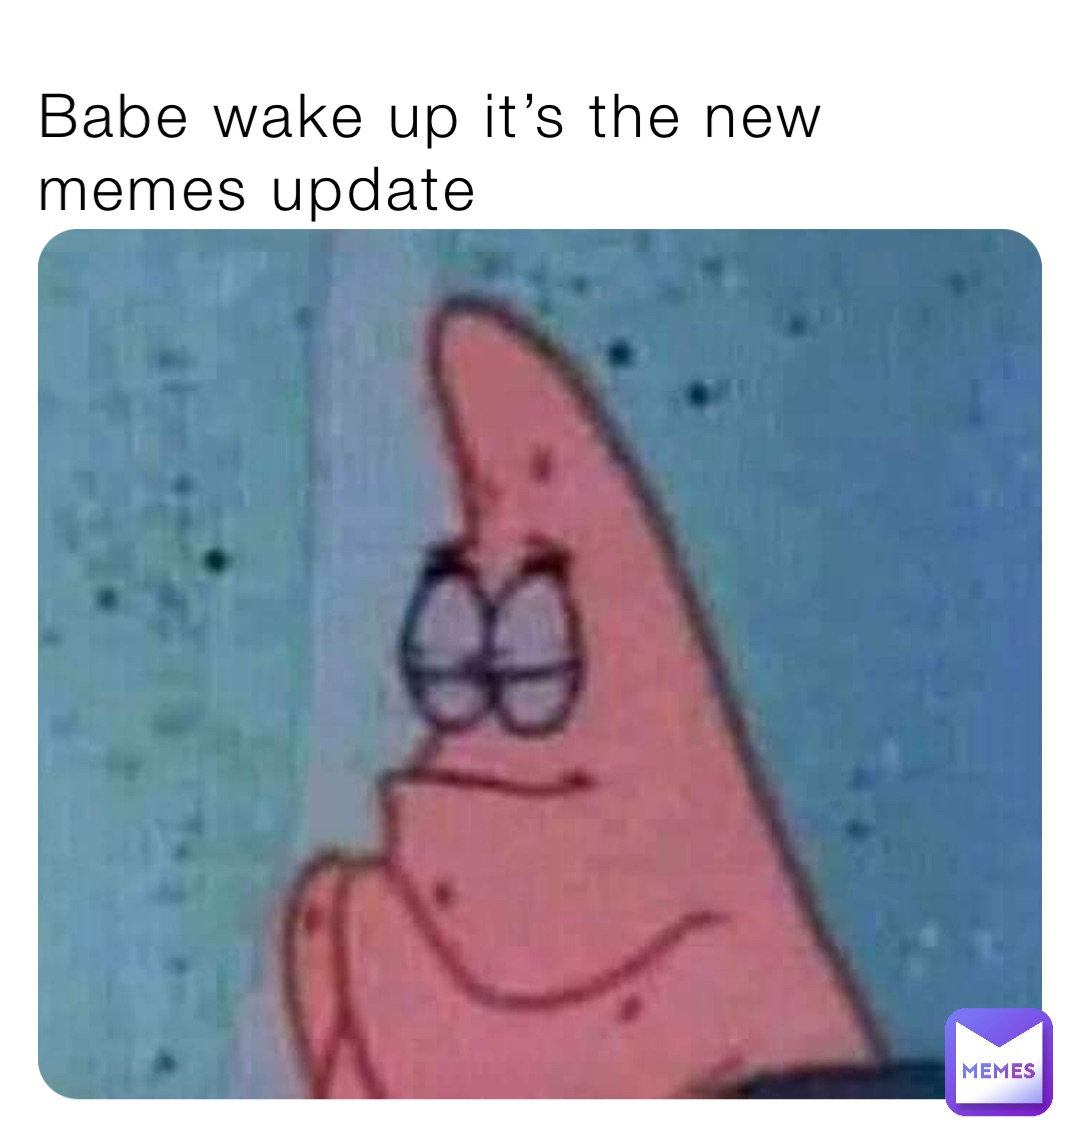 Babe wake up it’s the new memes update